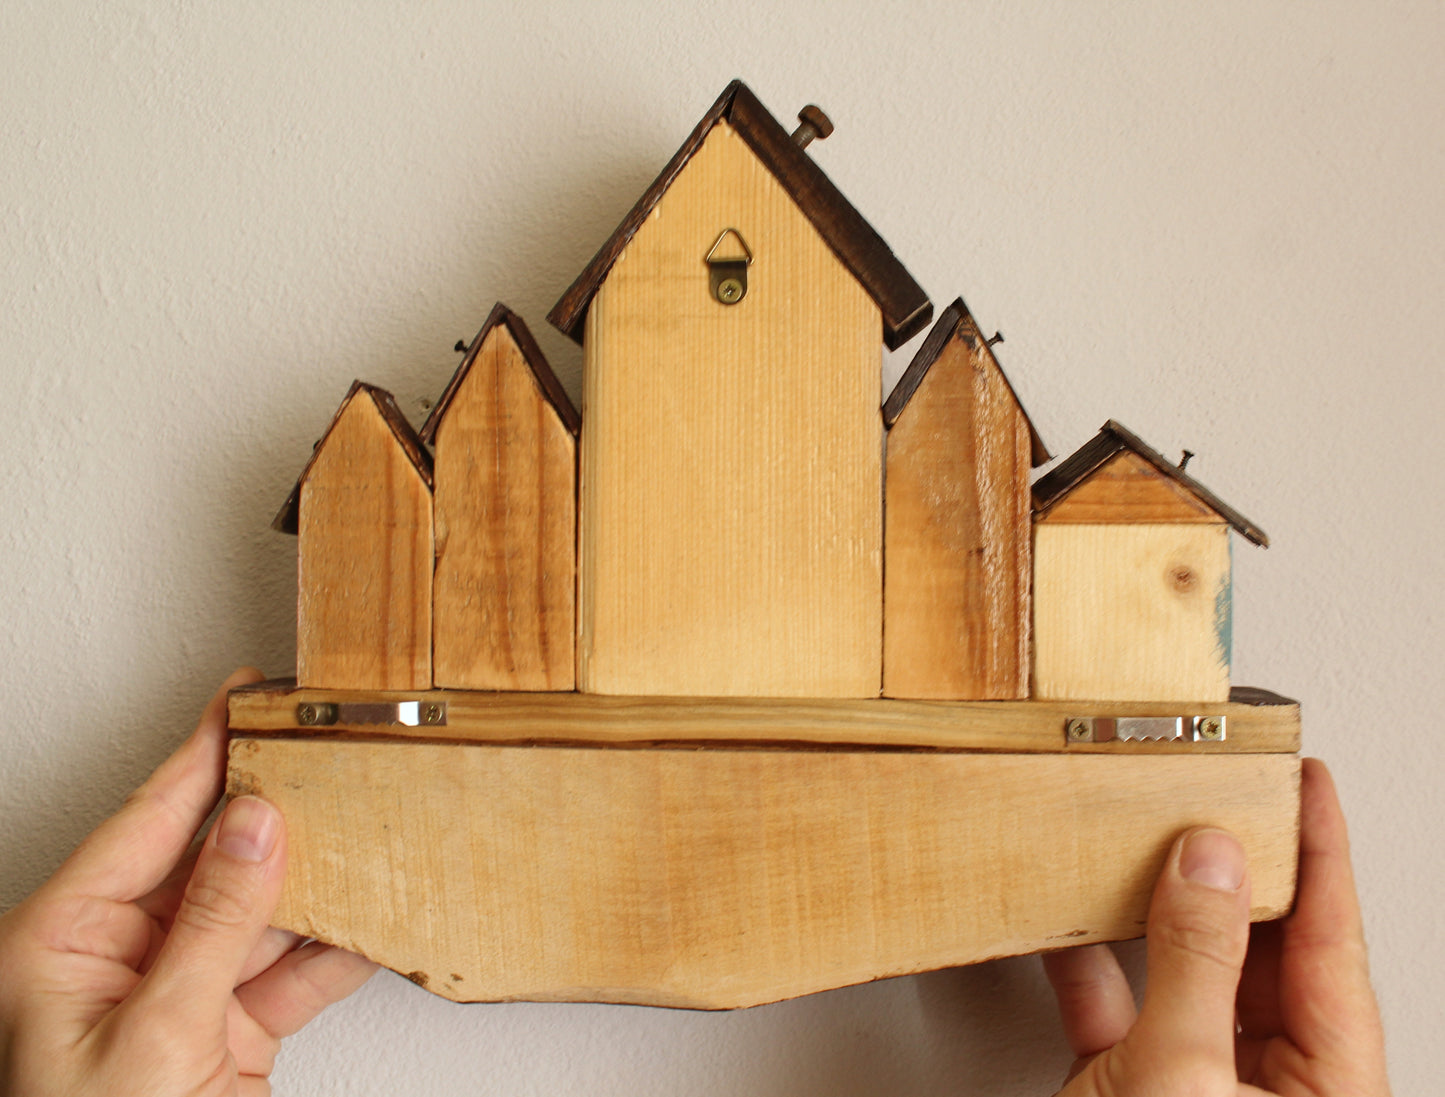 Key holder for wall, Wooden Houses